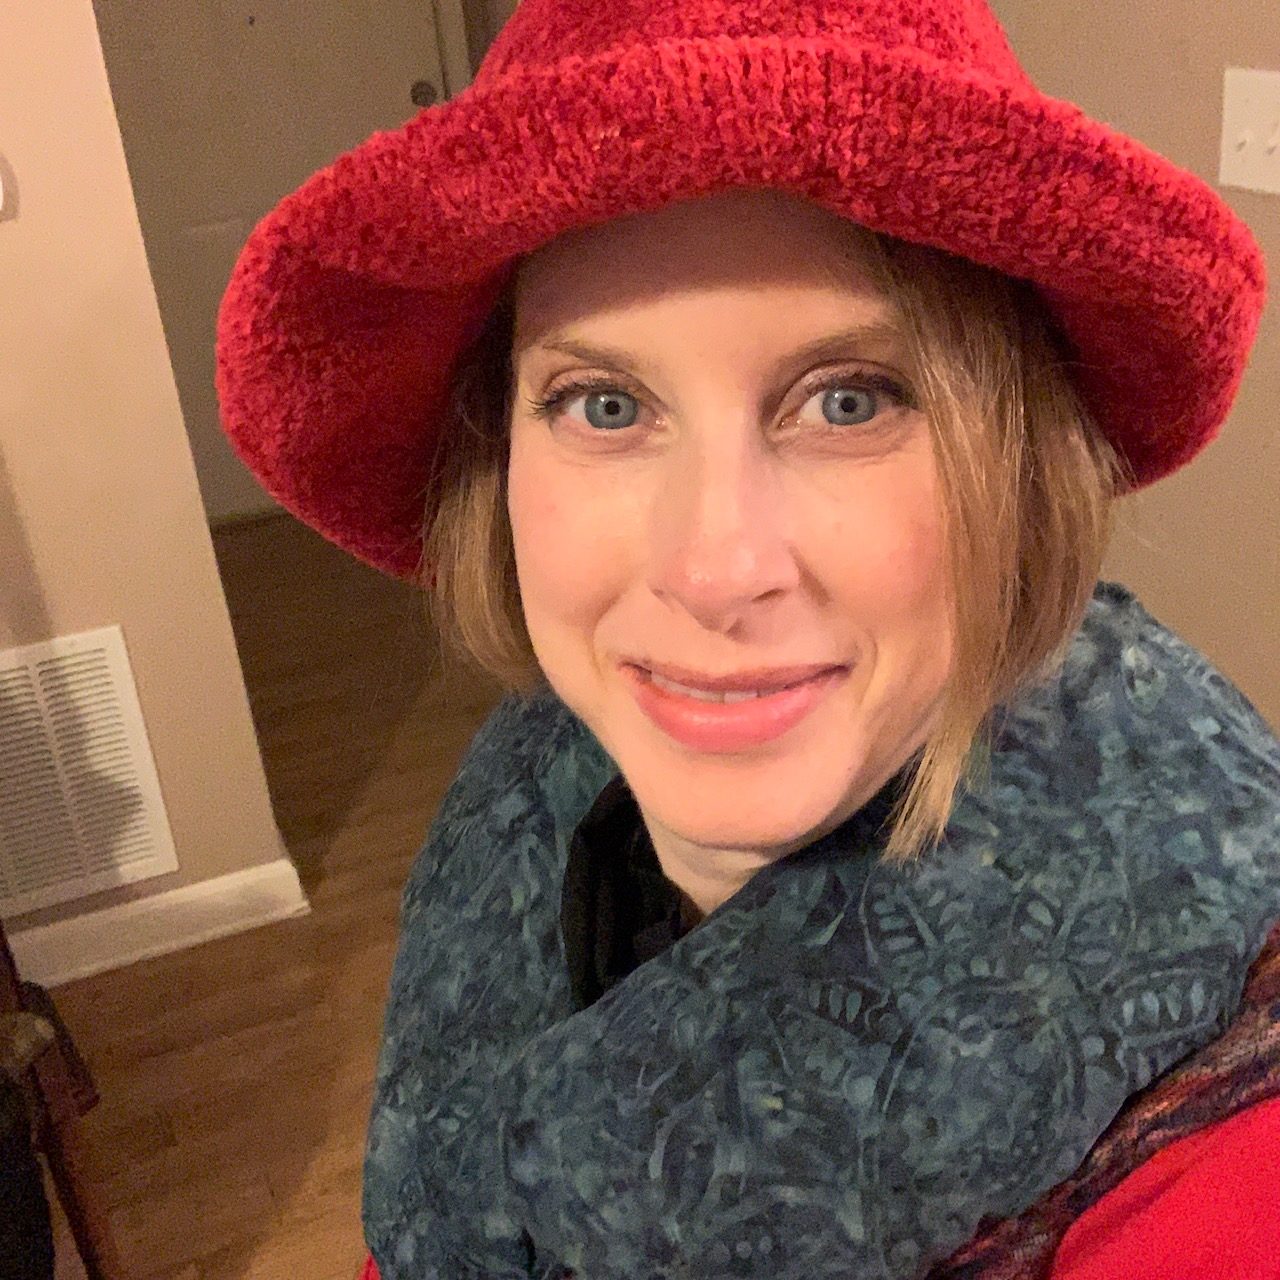 Jenny wearing a red hat and gray neck wrap.